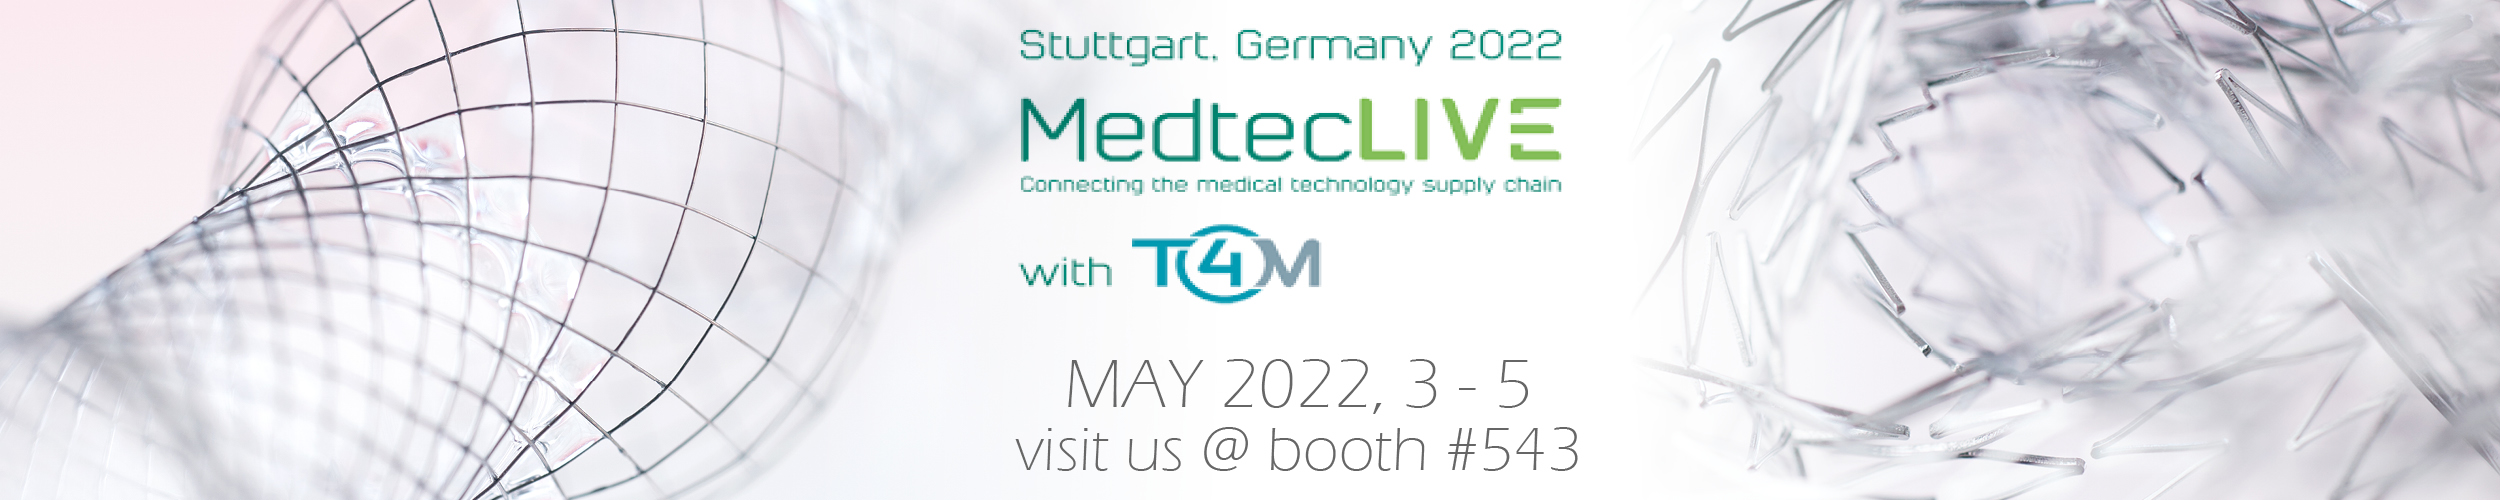 MedtecLIVE with T4M 2022